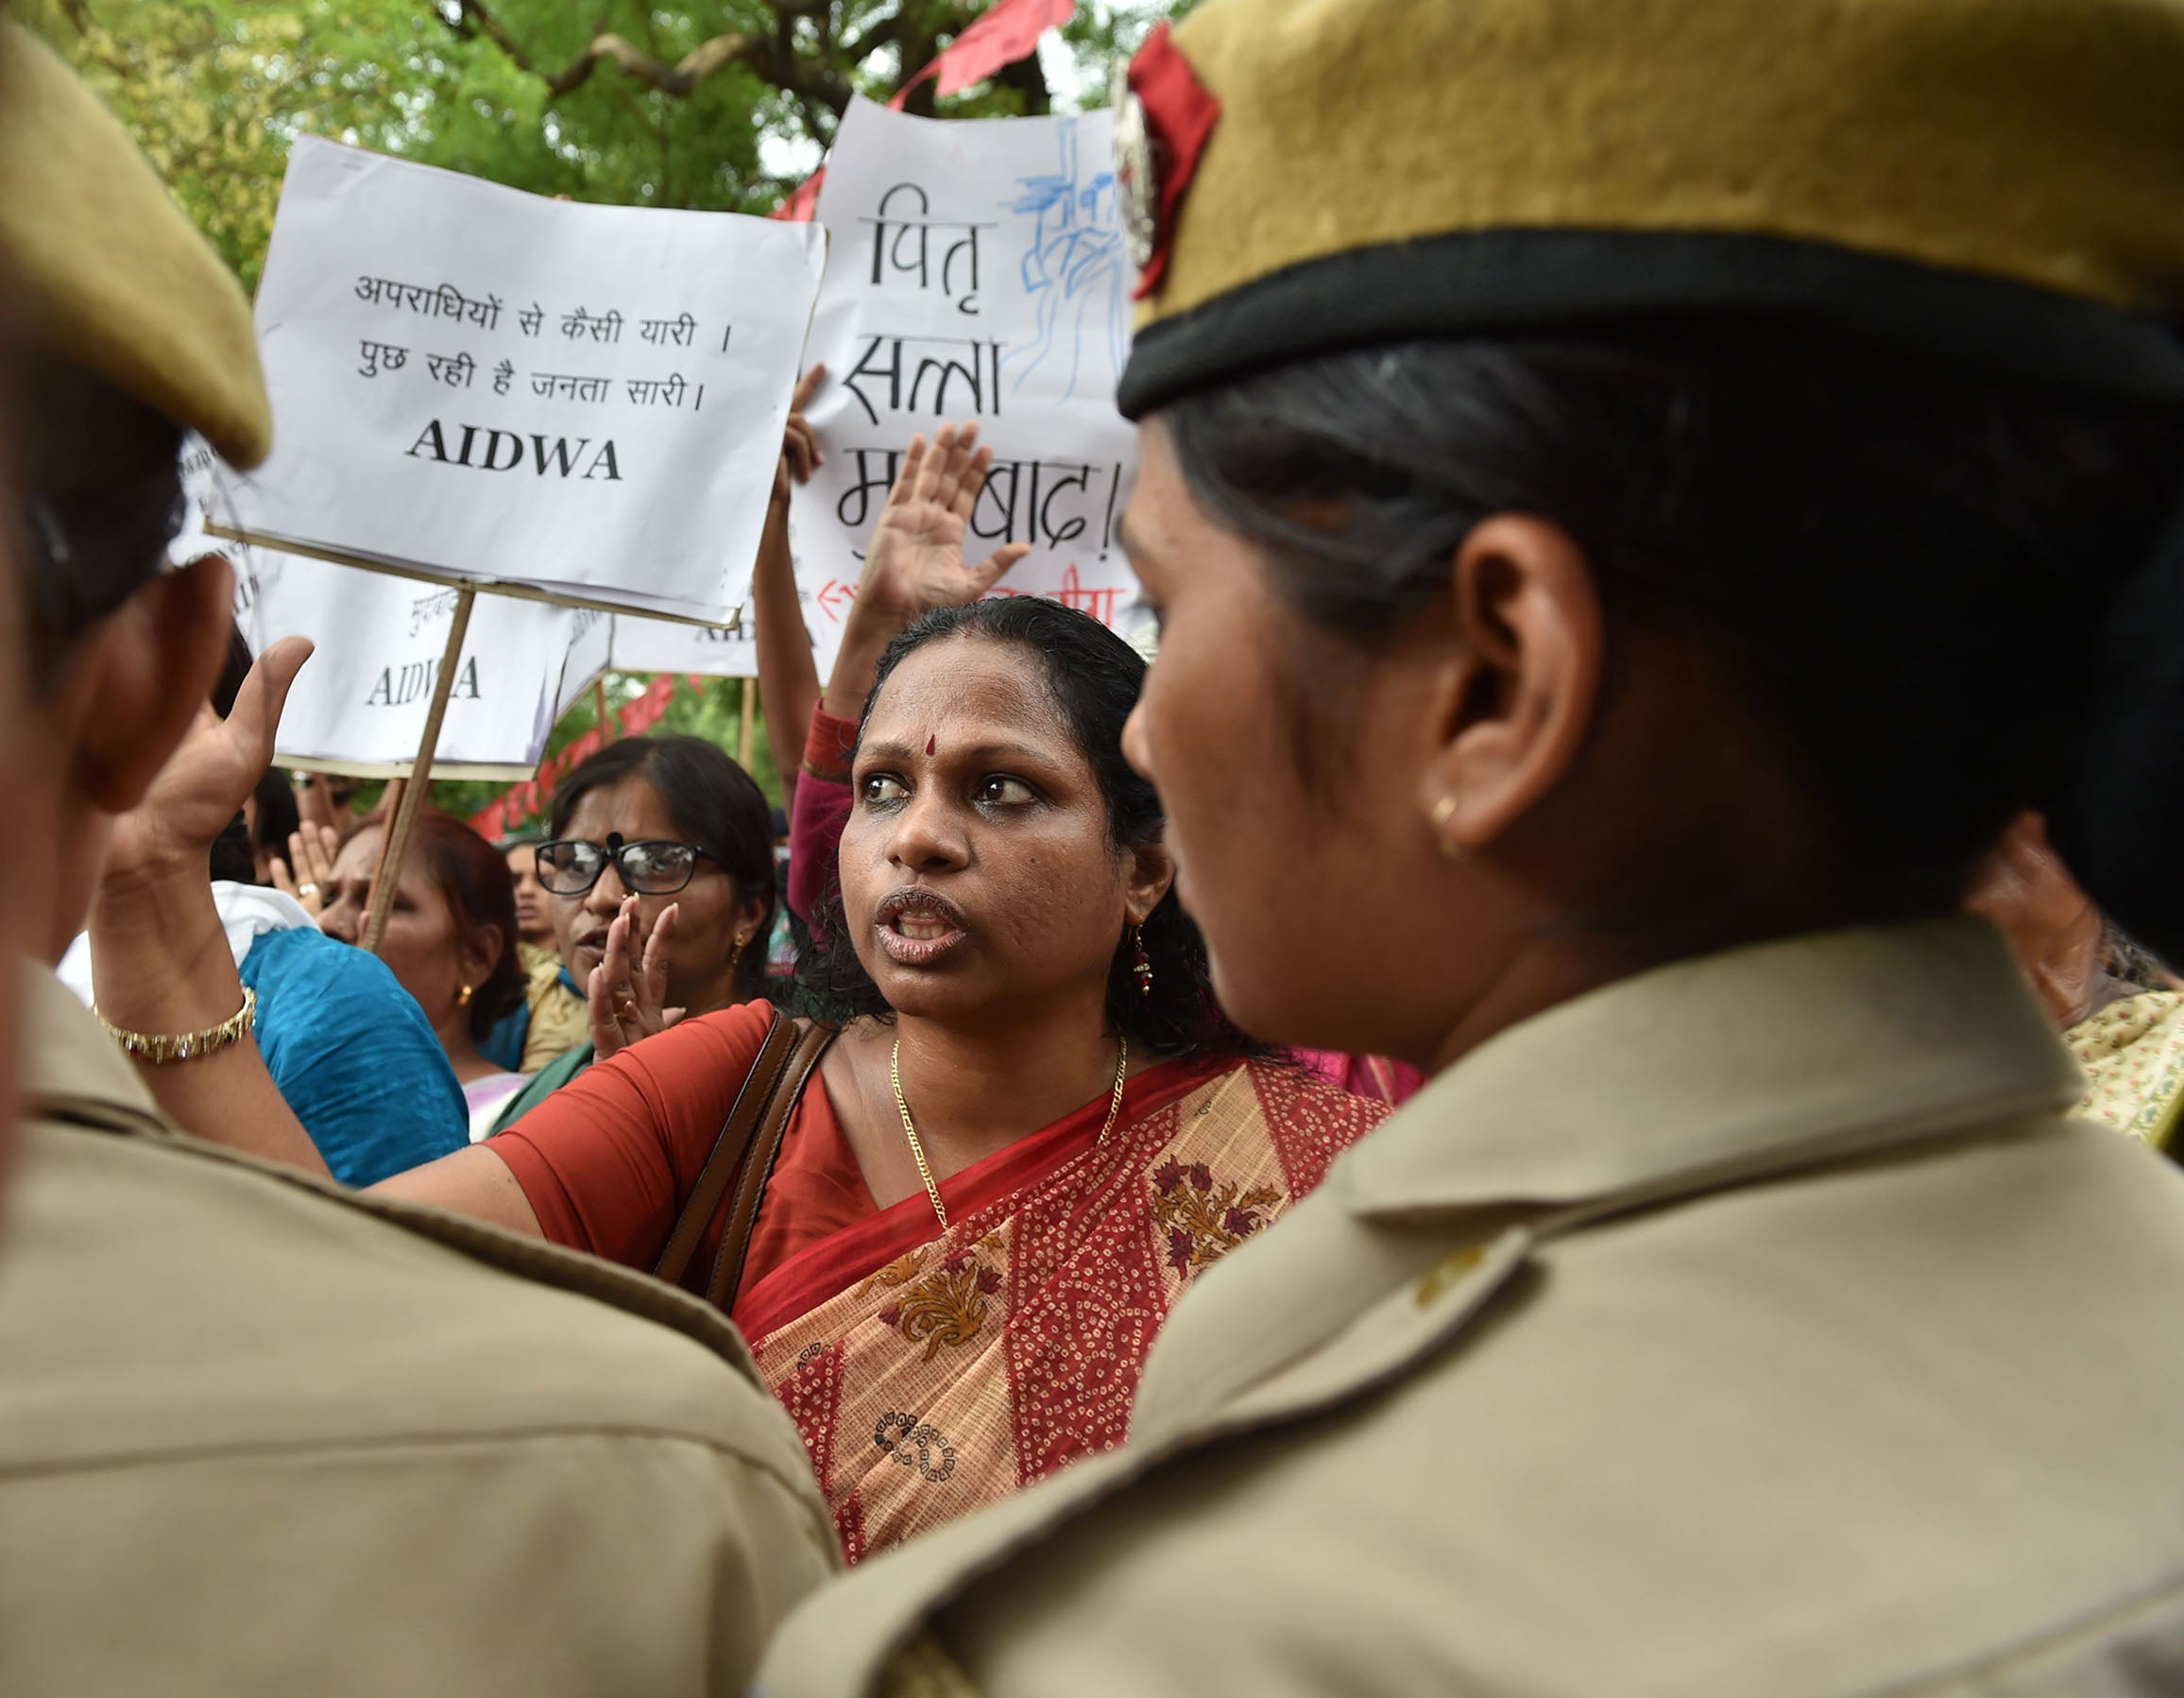 Indian activists shout slogans as they are confronted by police officials during a protest outside Kerala House in New Delhi